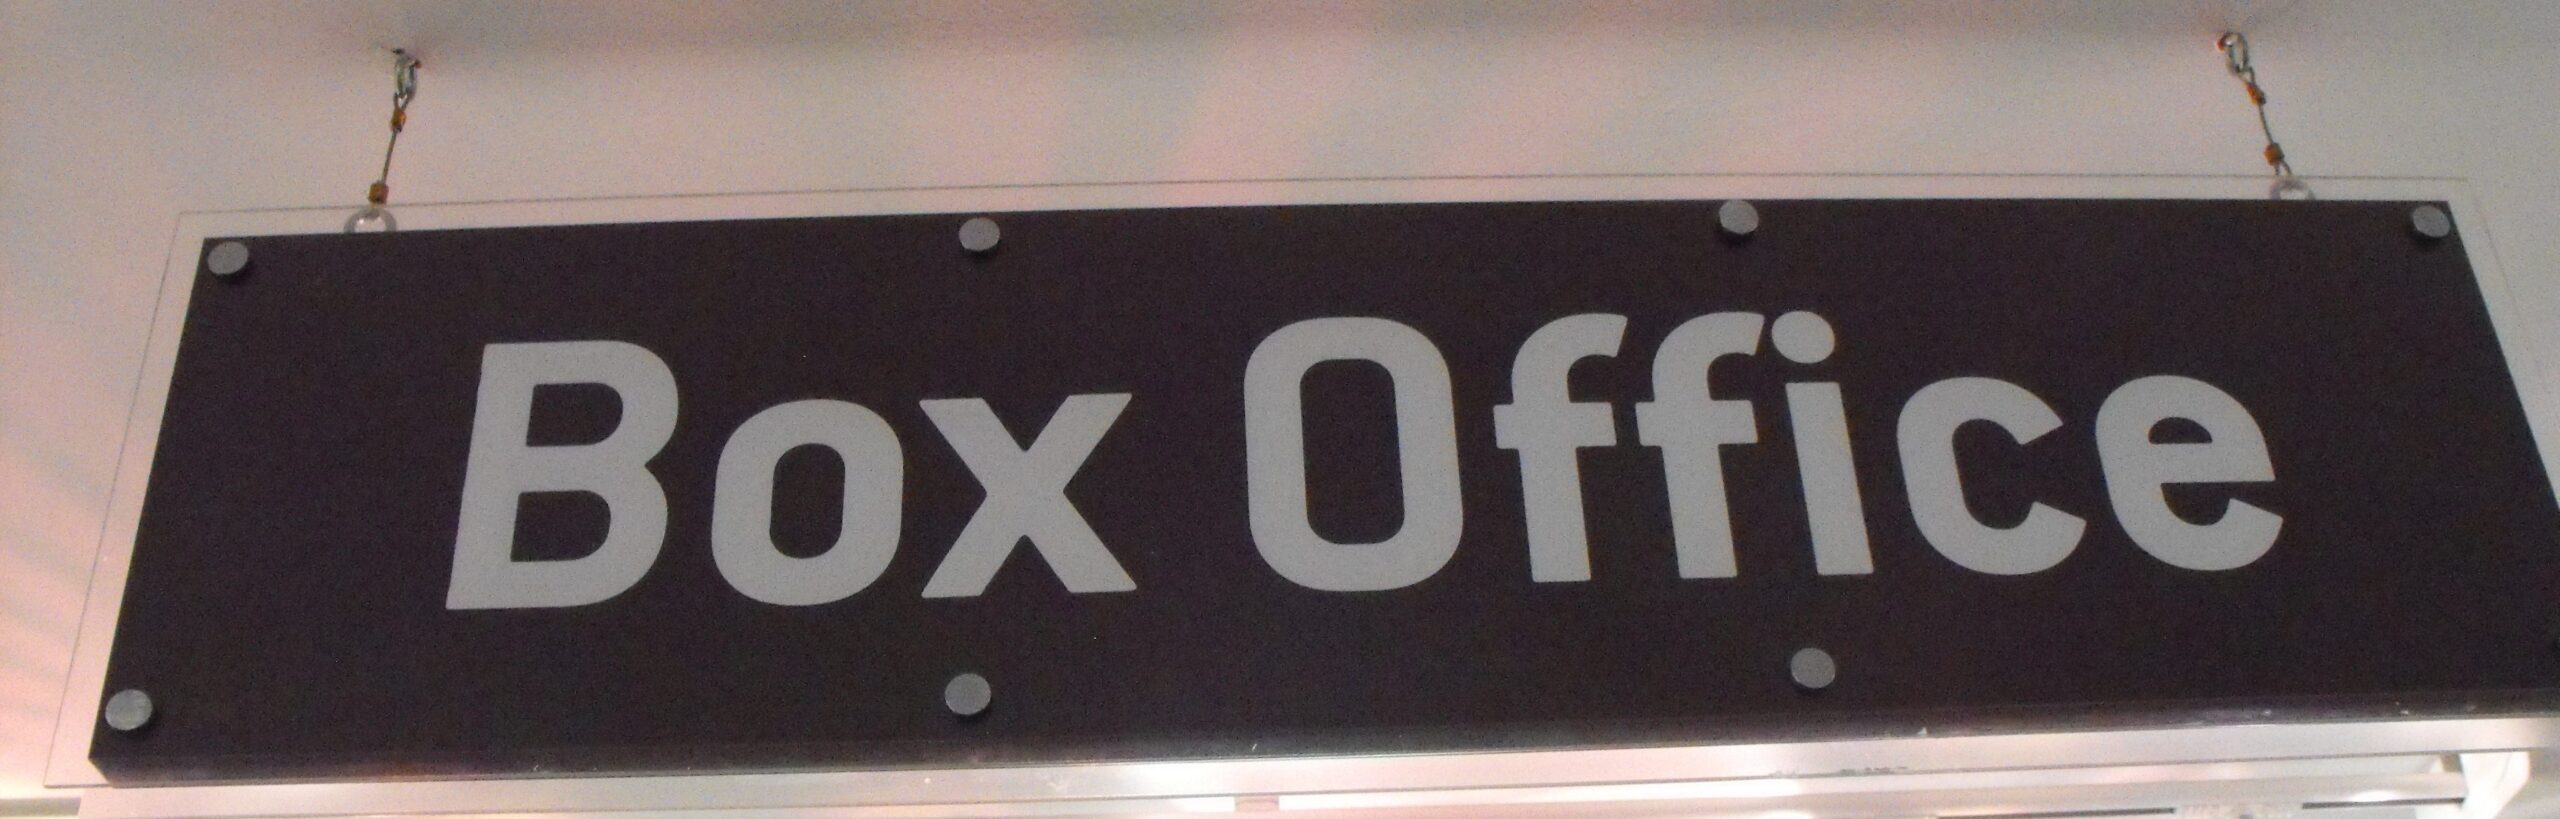 Photo of Box Office sign